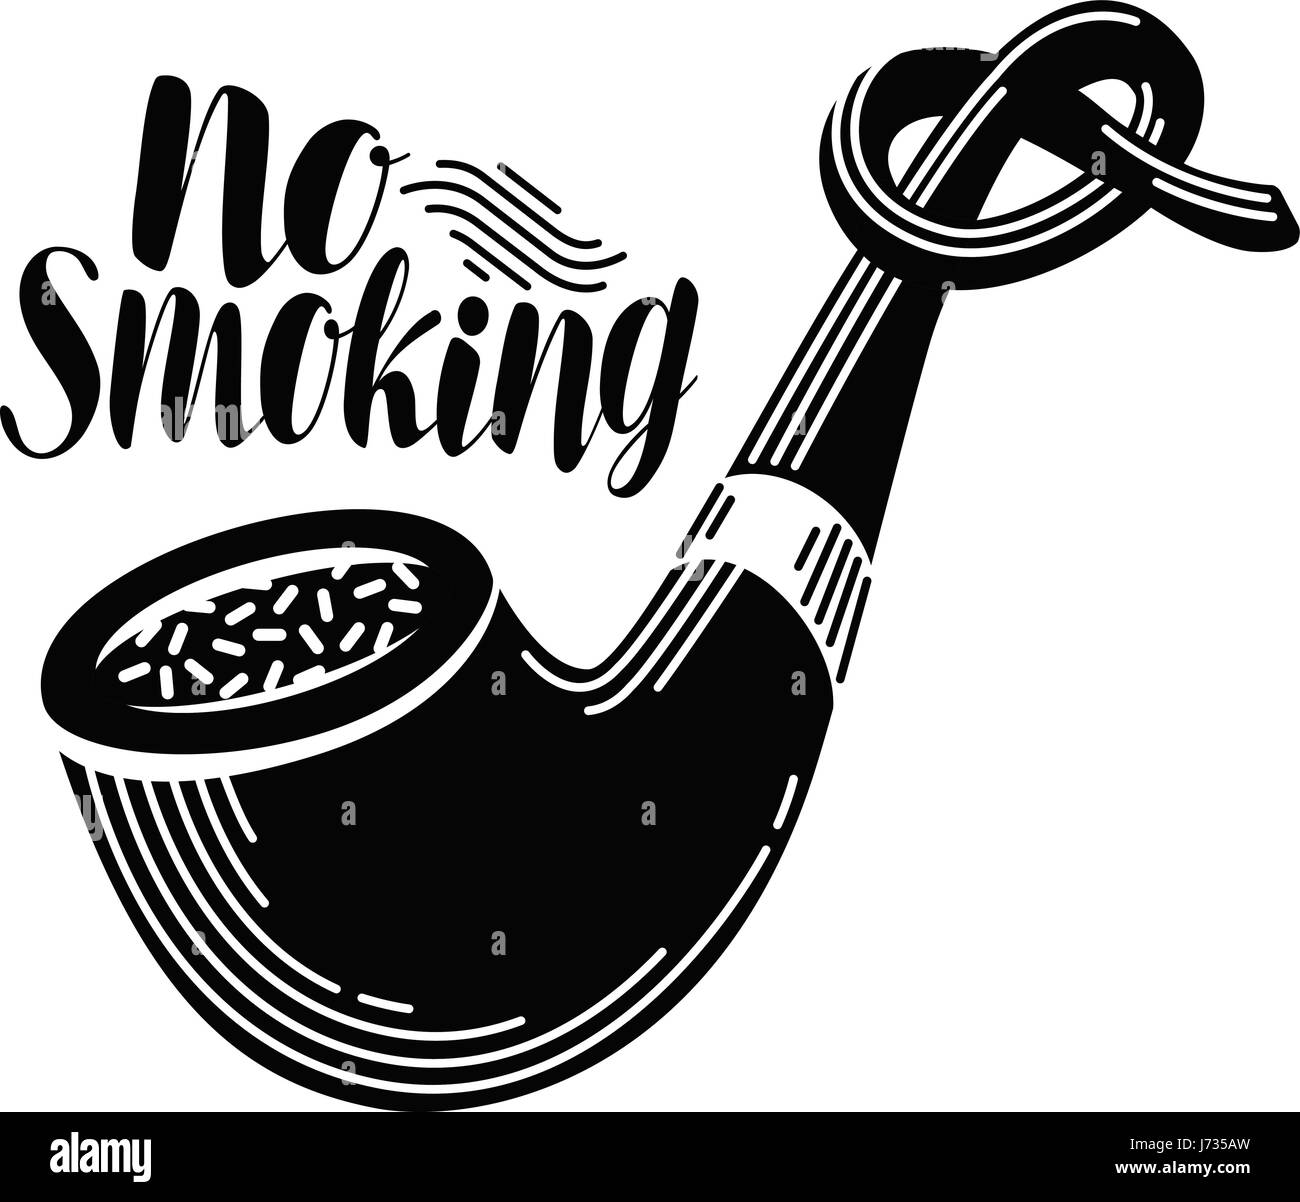 No smoking, healthy lifestyle label. Tobacco pipe tied in knot. Lettering, calligraphy vector illustration Stock Vector